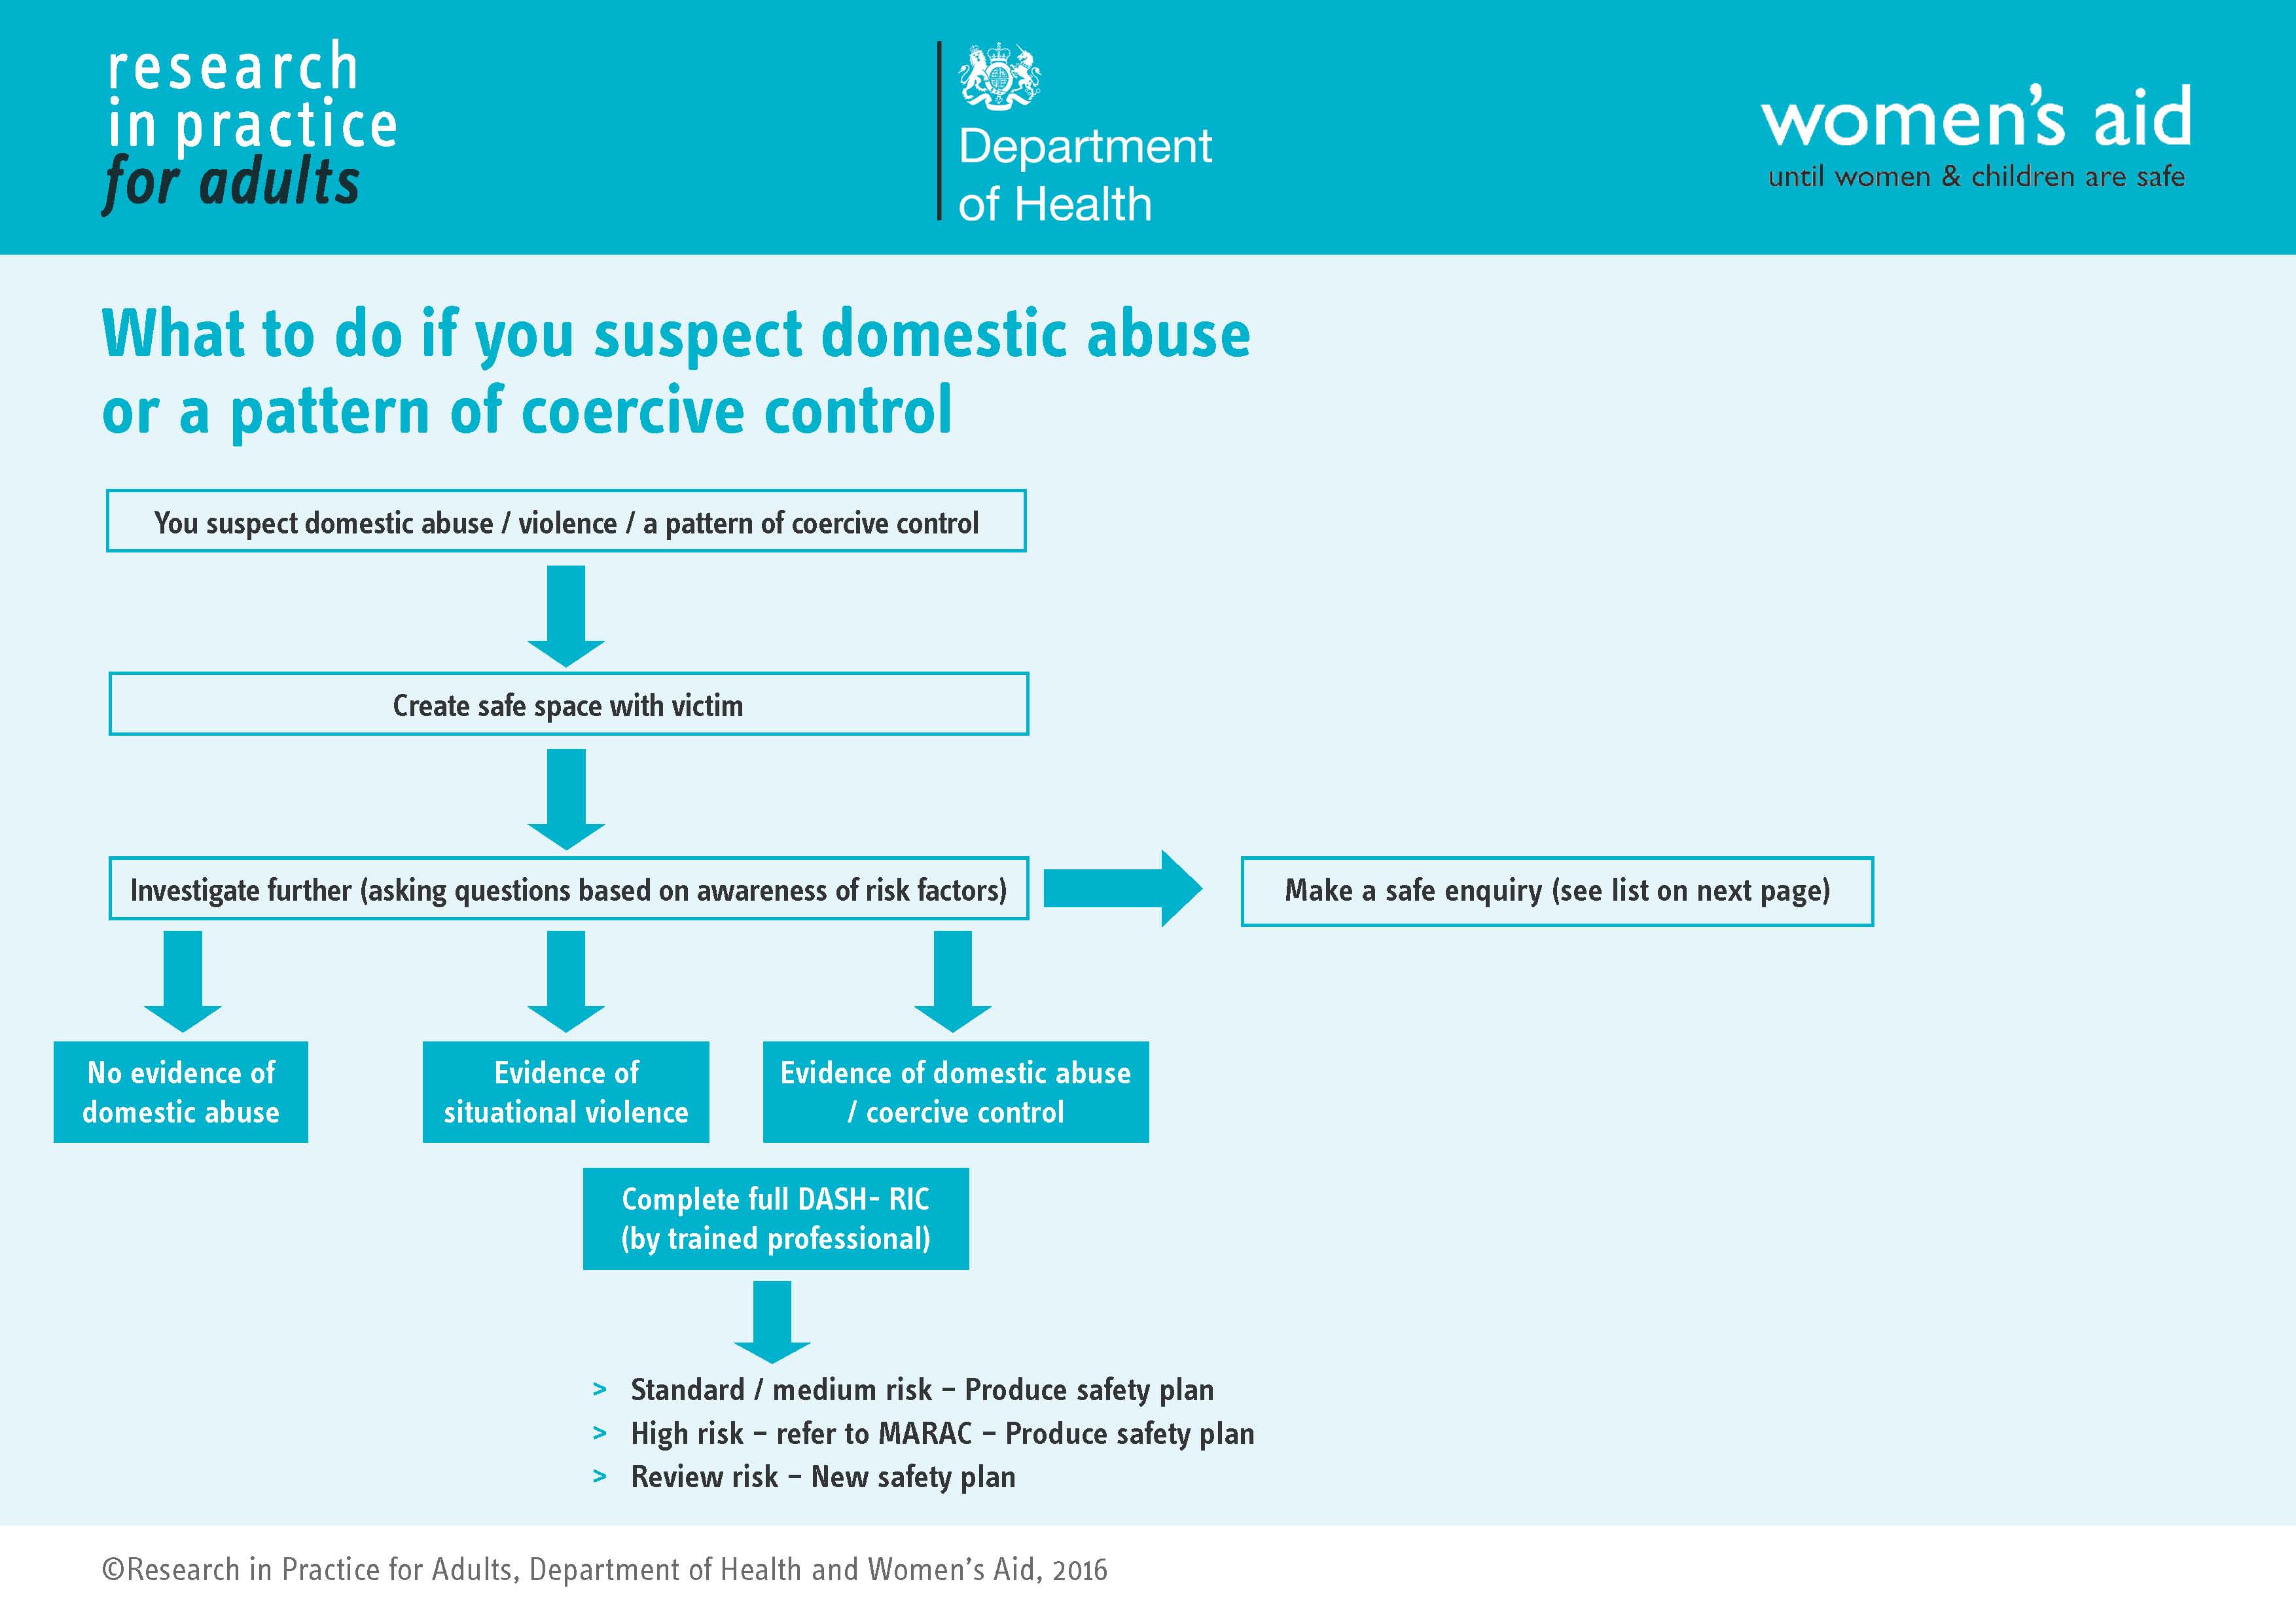 What to do if you suspect domestic abuse or a pattern of coercive control